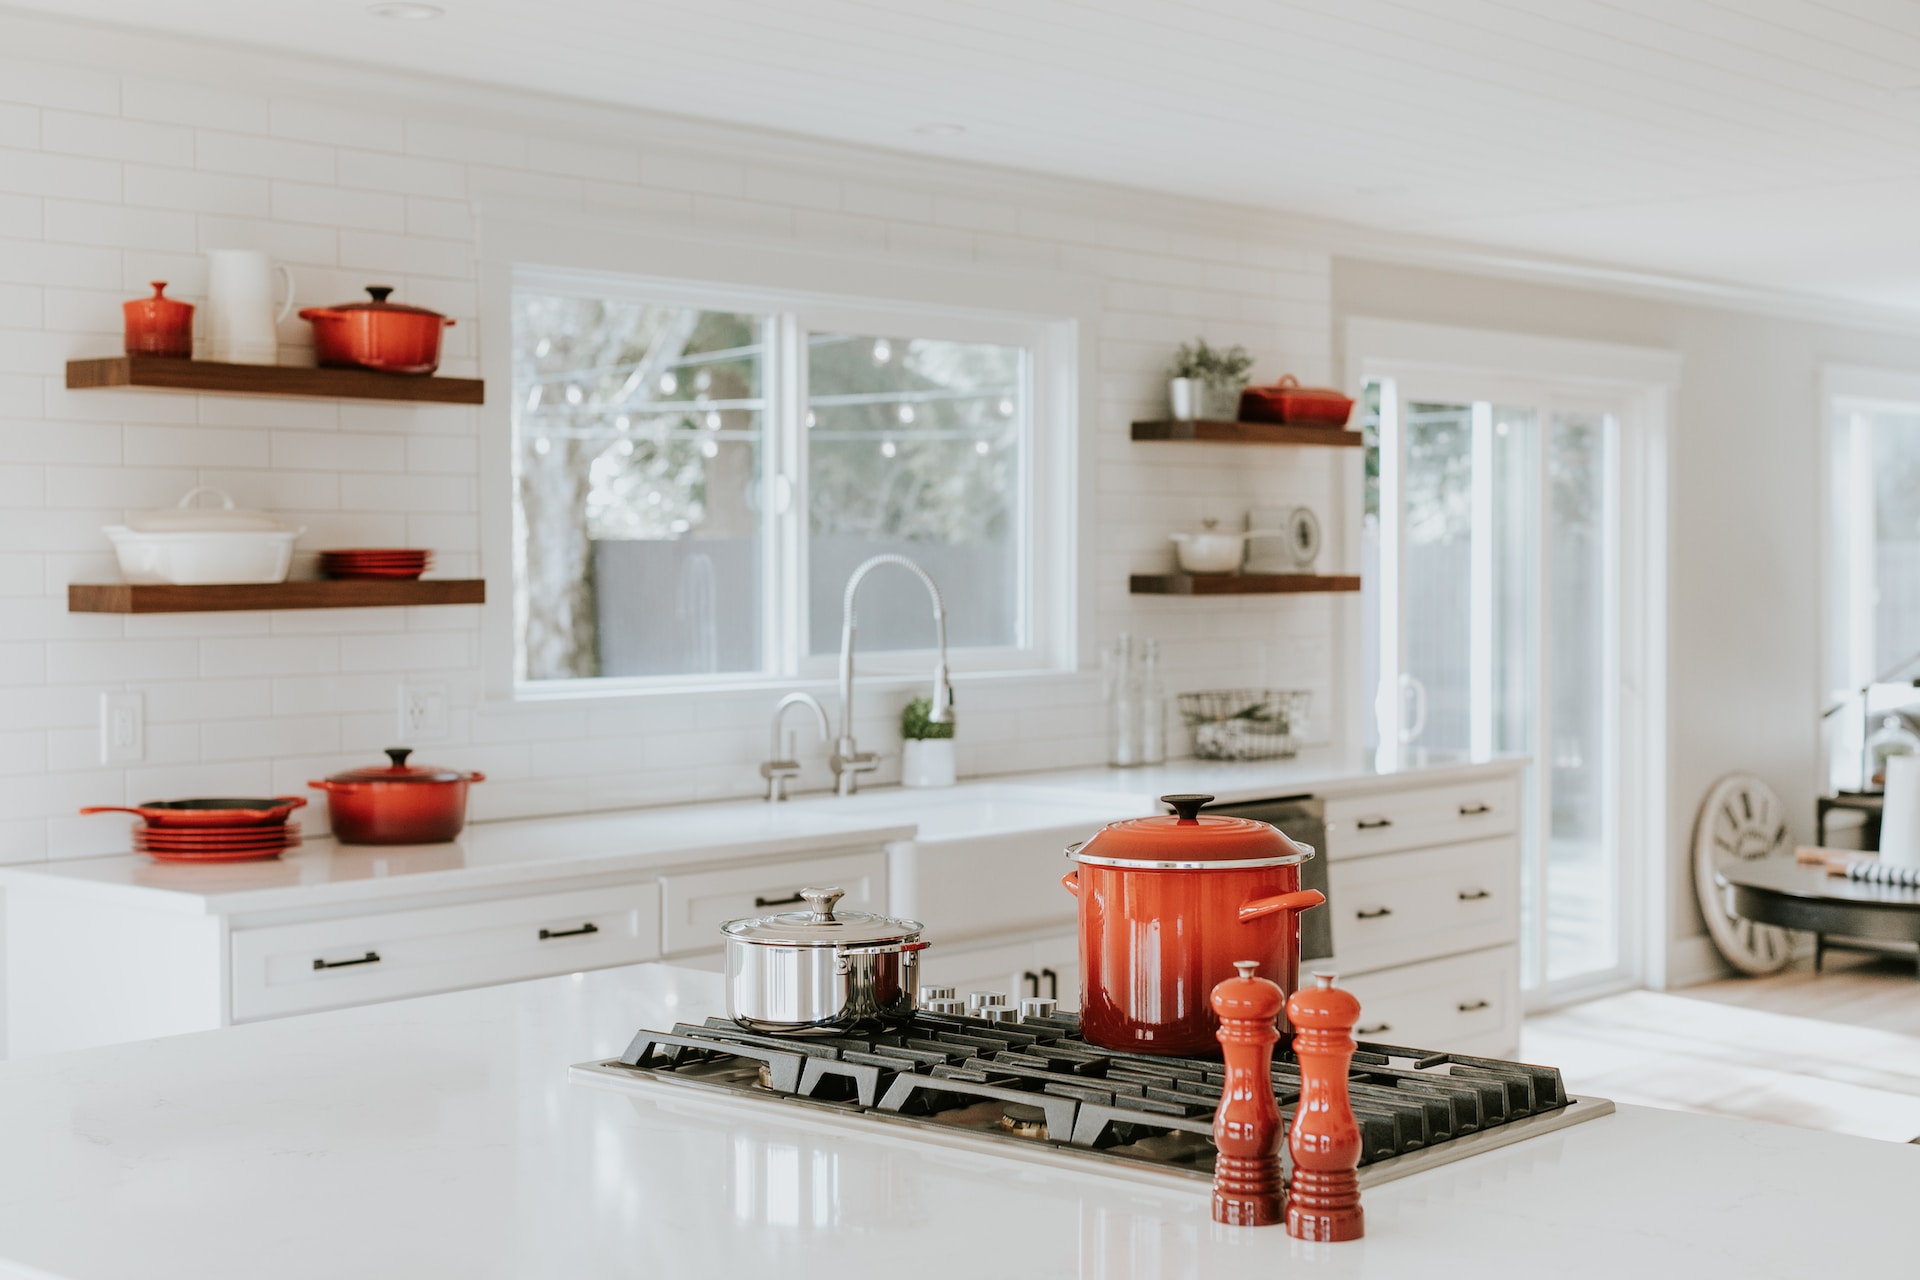 Red pots and pans in a white kitchen